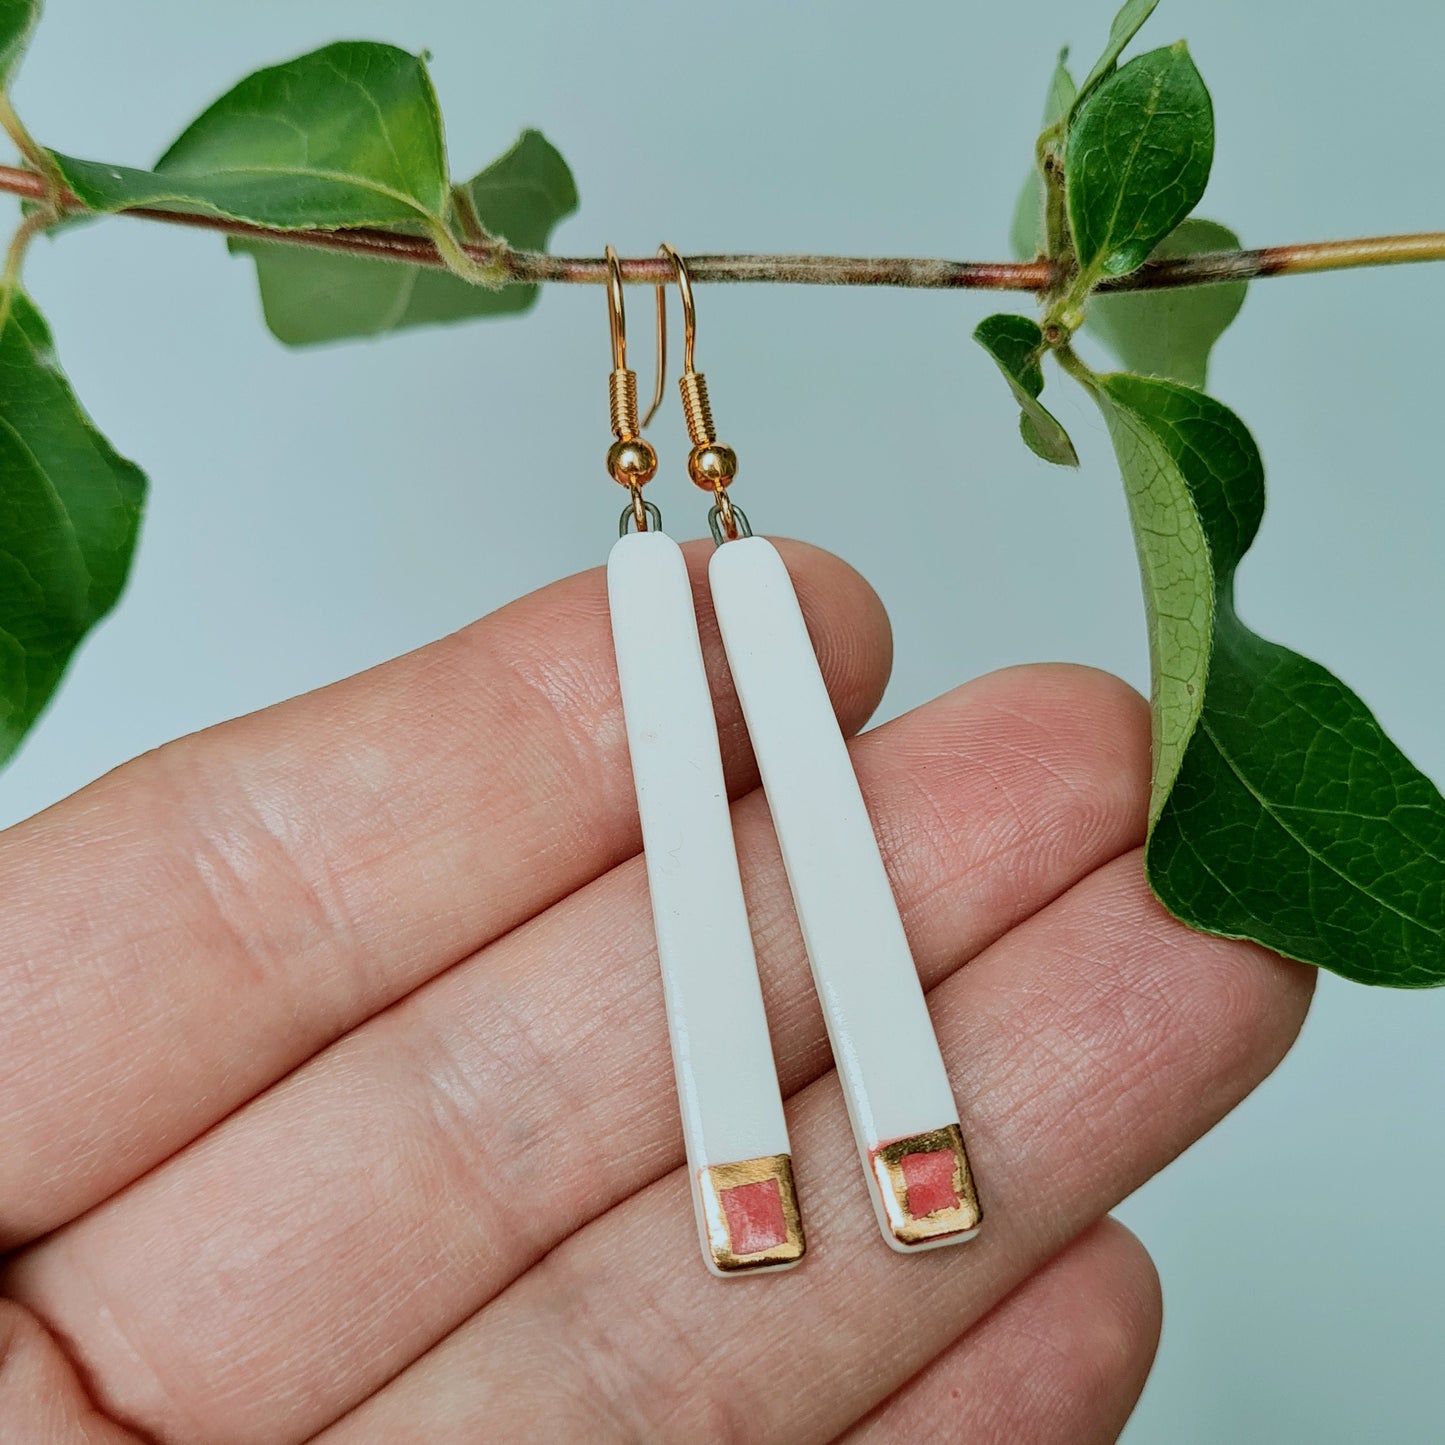 Handmade ceramic earrings with 24c gold rectangular with pink detail